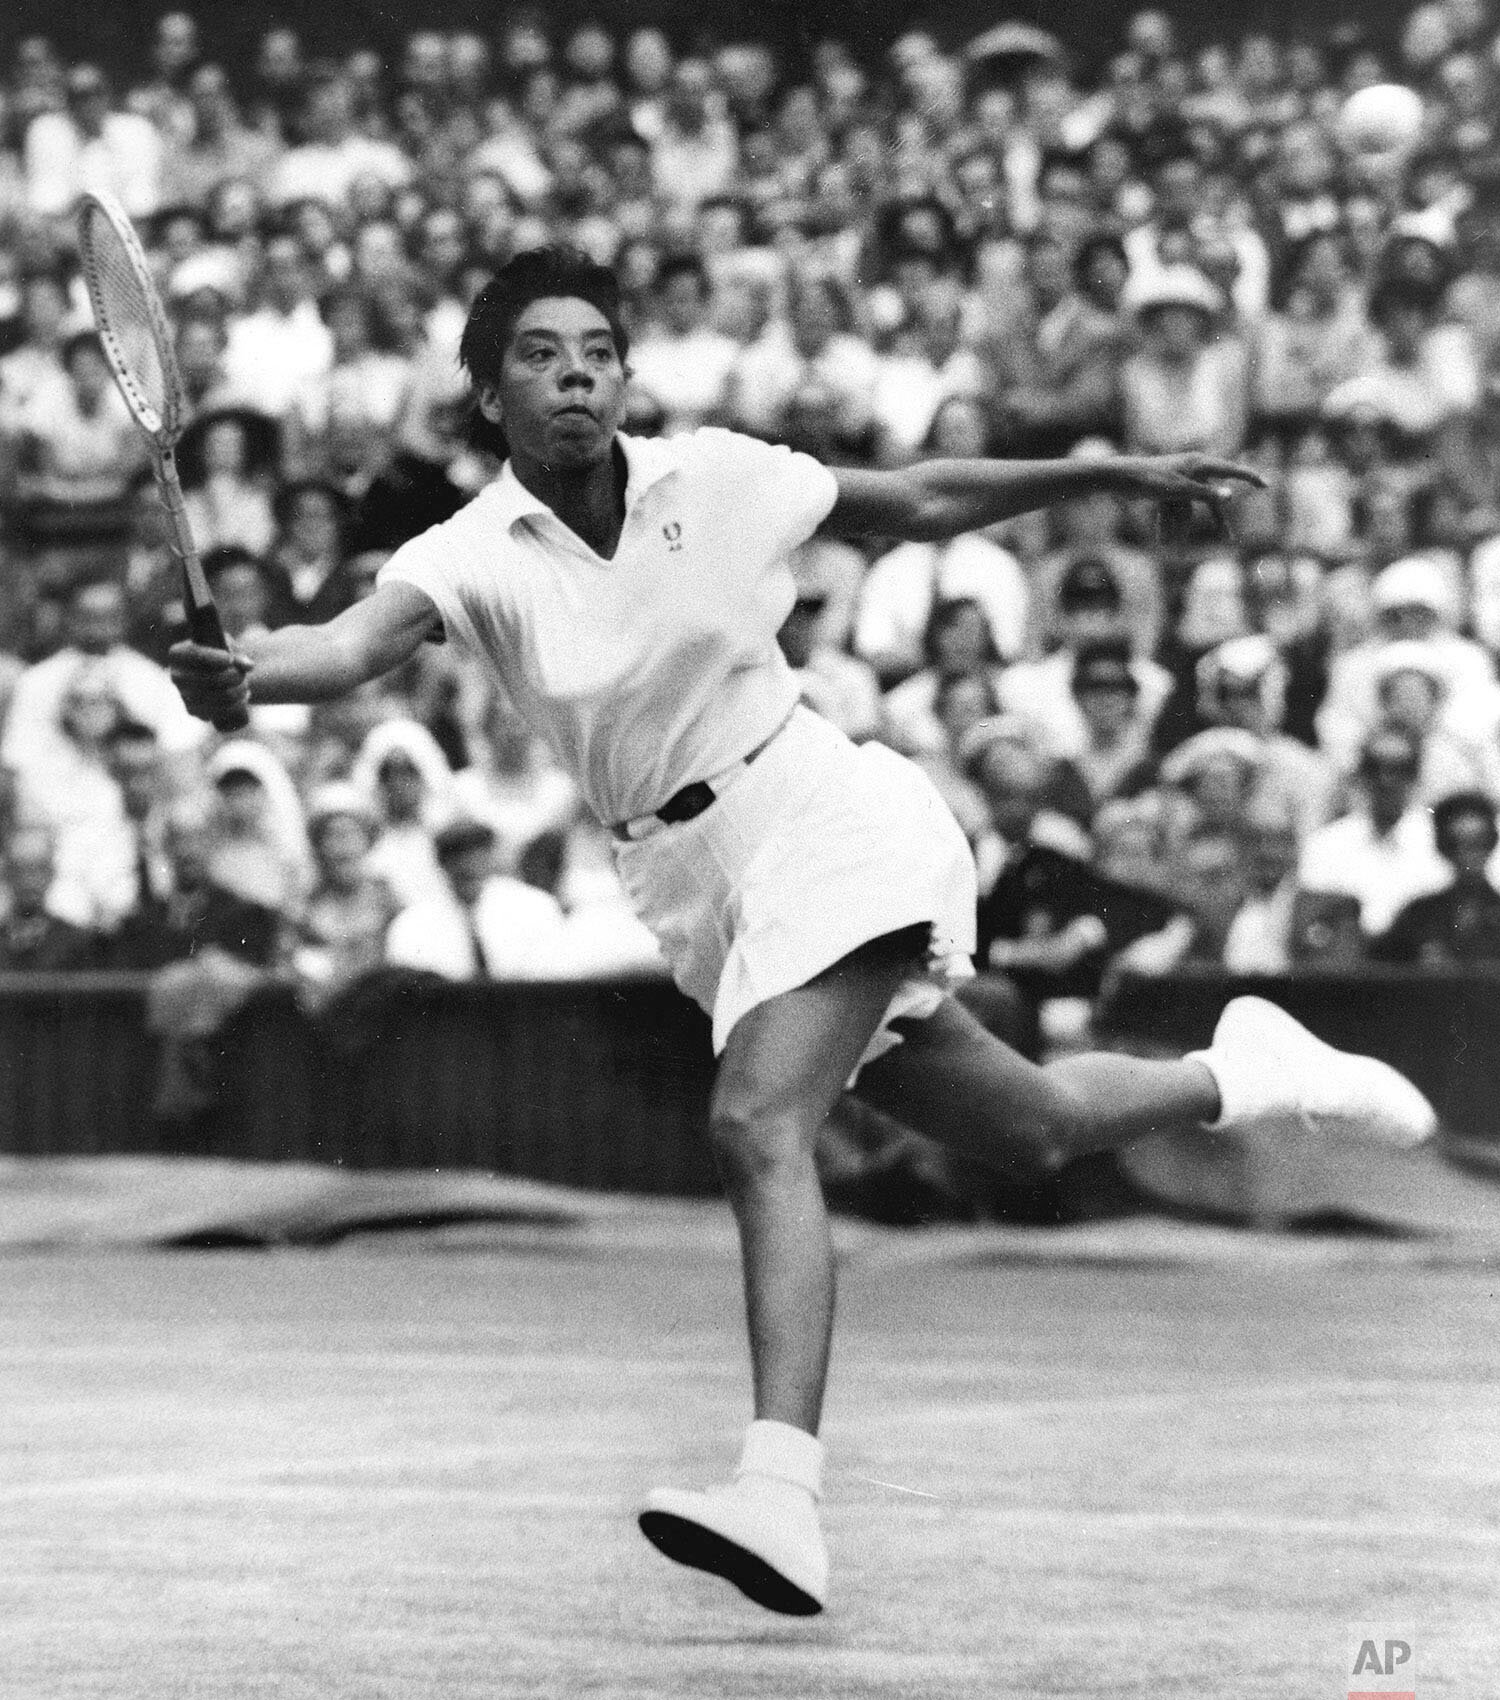  Althea Gibson prepares to volley against Britain's Ann Haydon during the Wimbledon womens singles semifinal tennis match in Wimbledon, England, in this July 3, 1958 file photo. (AP Photo) 